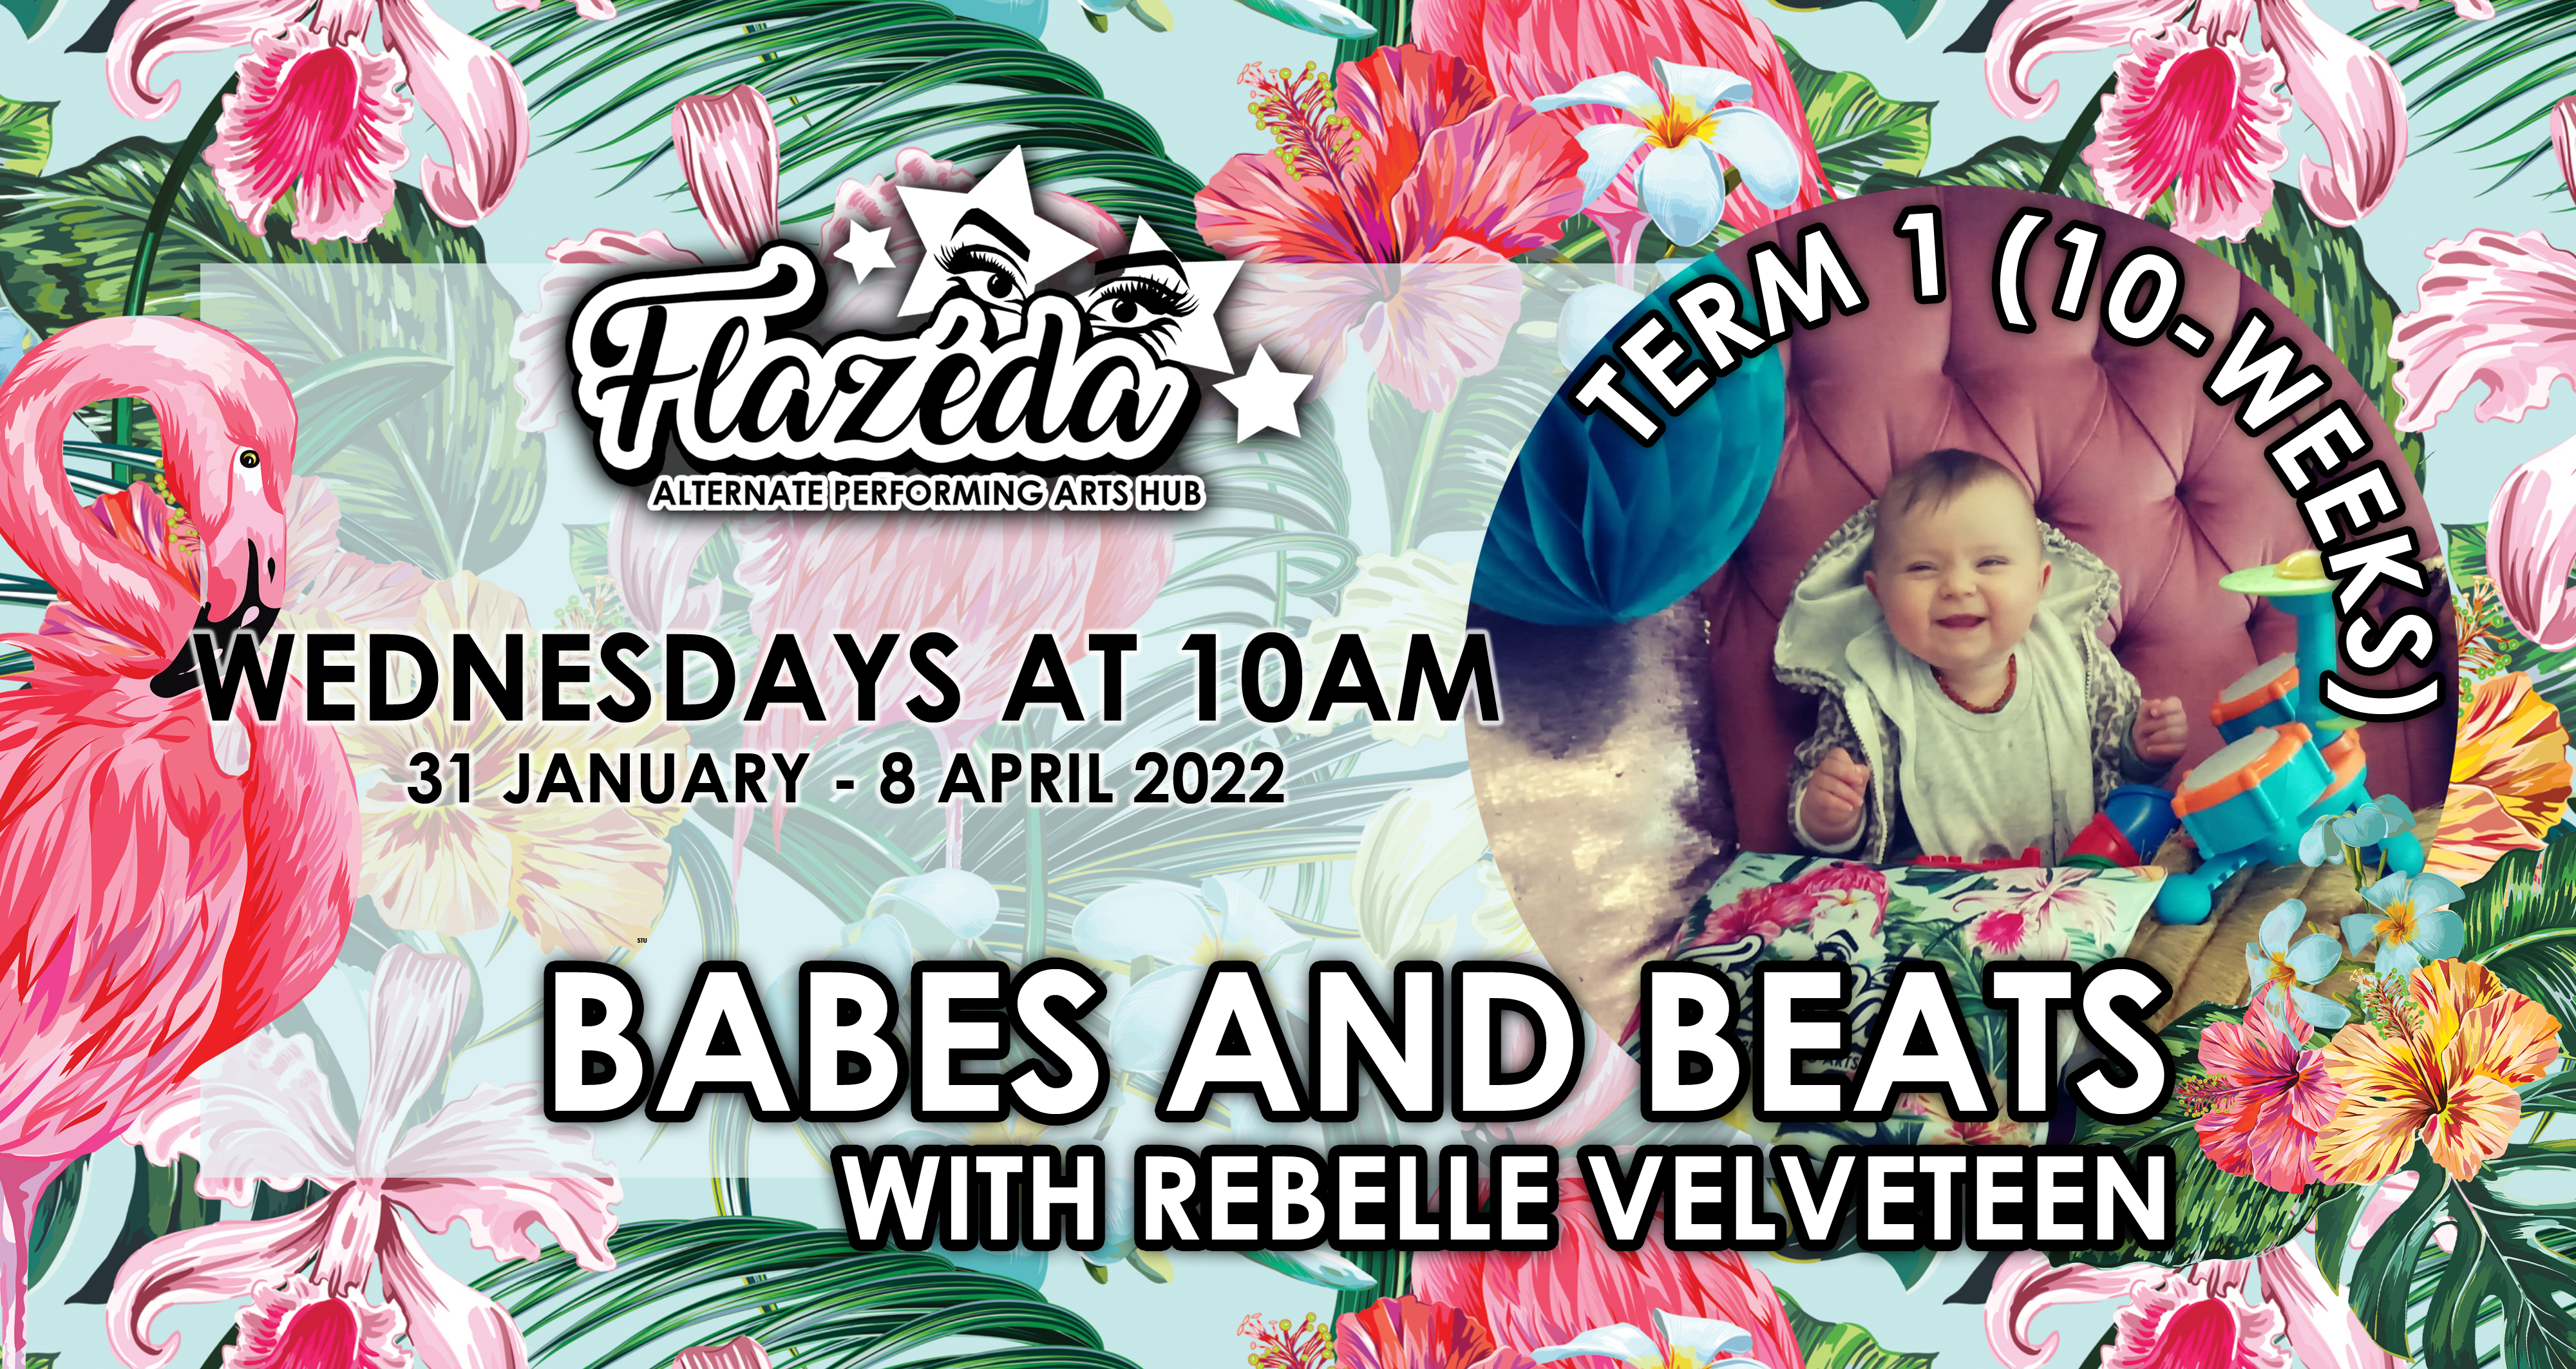 Babes and Beats with Rebelle Velveteen